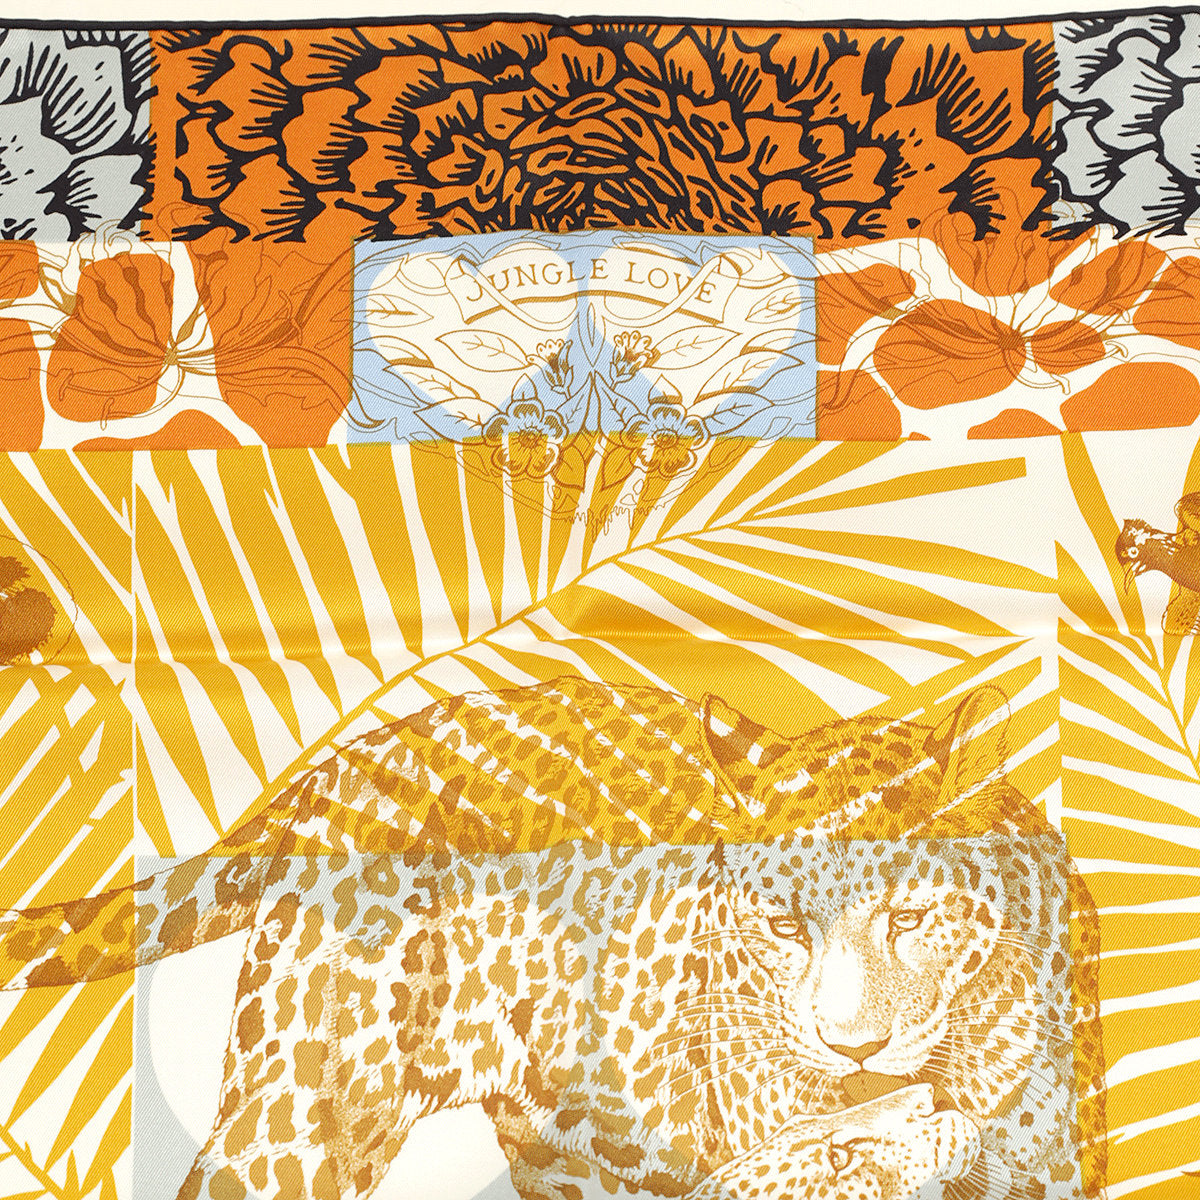 Hermes Scarf "Jungle Love au Tampon" by Robert Dallet and Giancarlo Pagni 70cm Silk | Foulard Carre